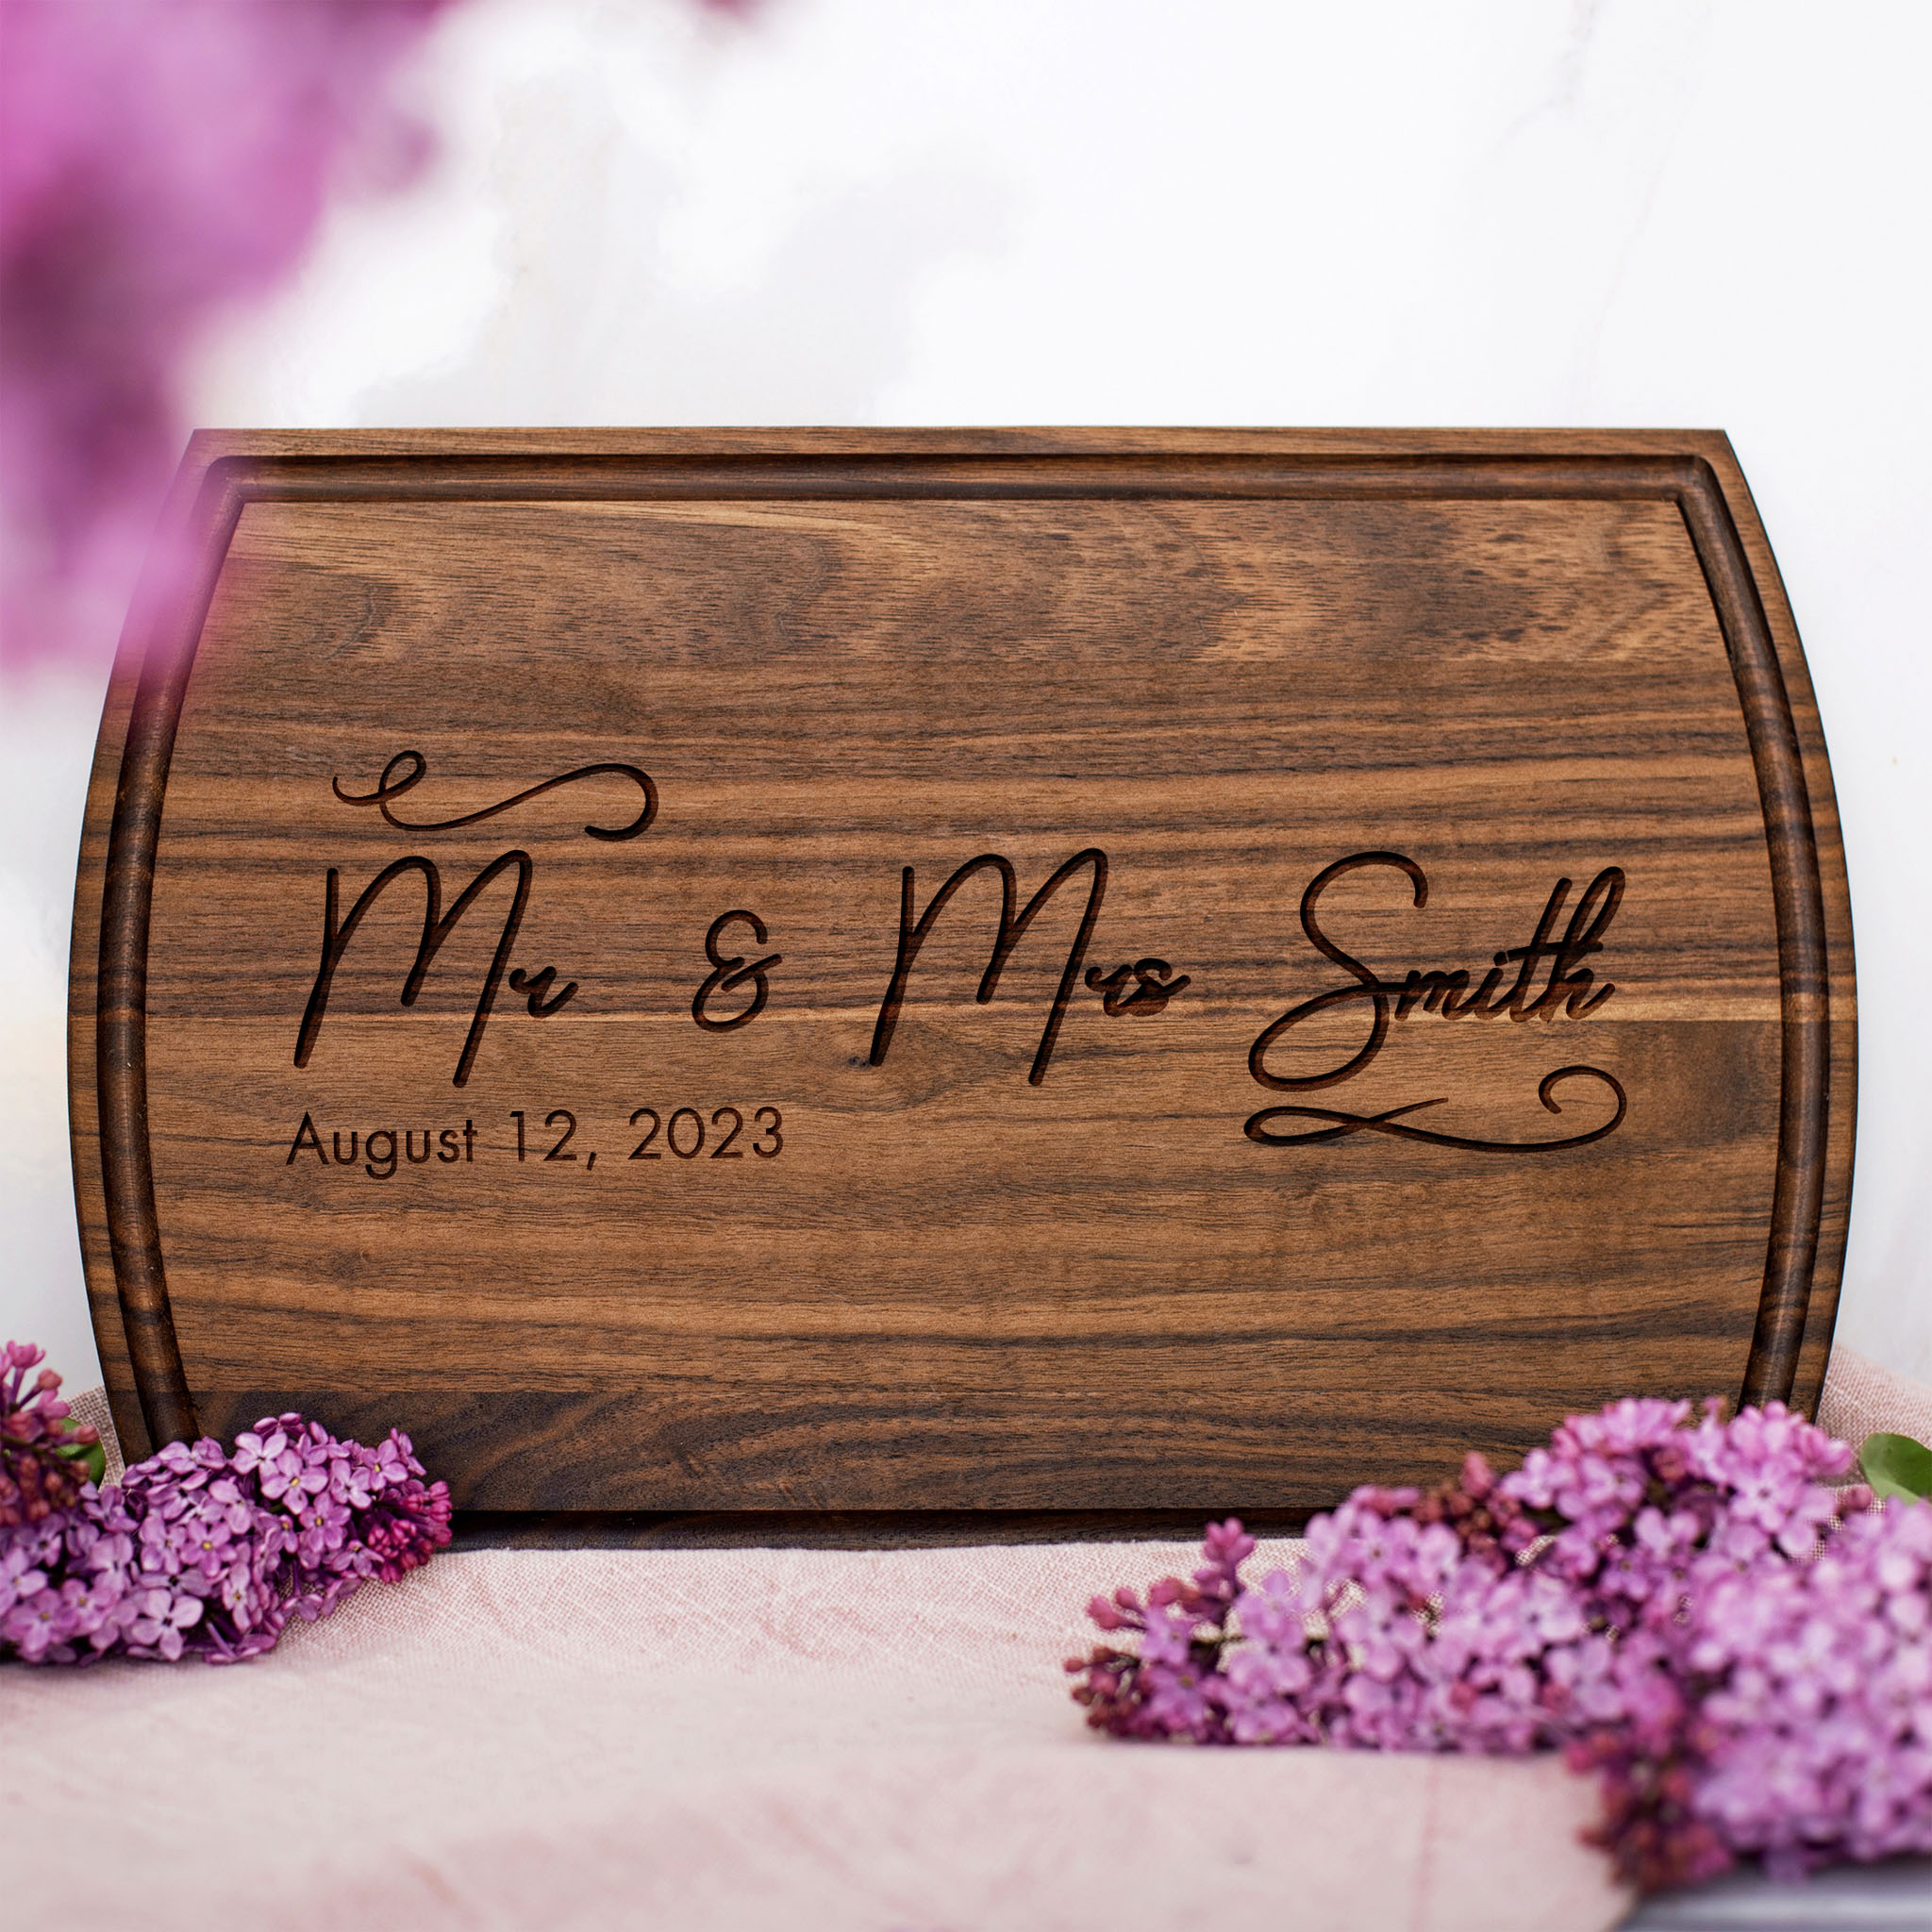 24 Custom Wedding Gifts That Are Creative and Unique